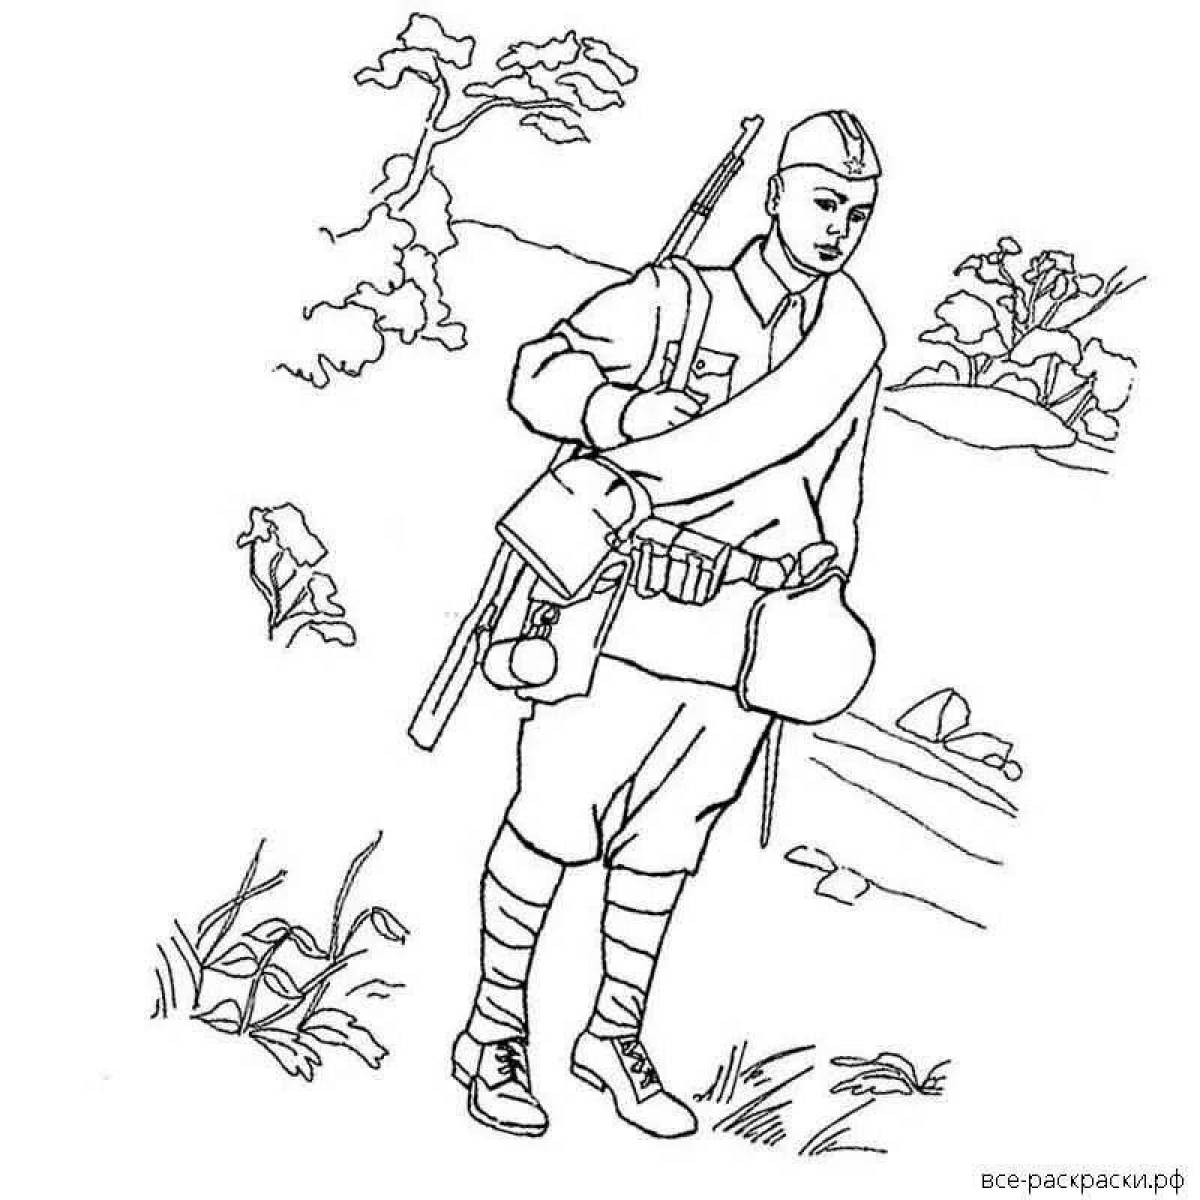 Exalted military drawing coloring page